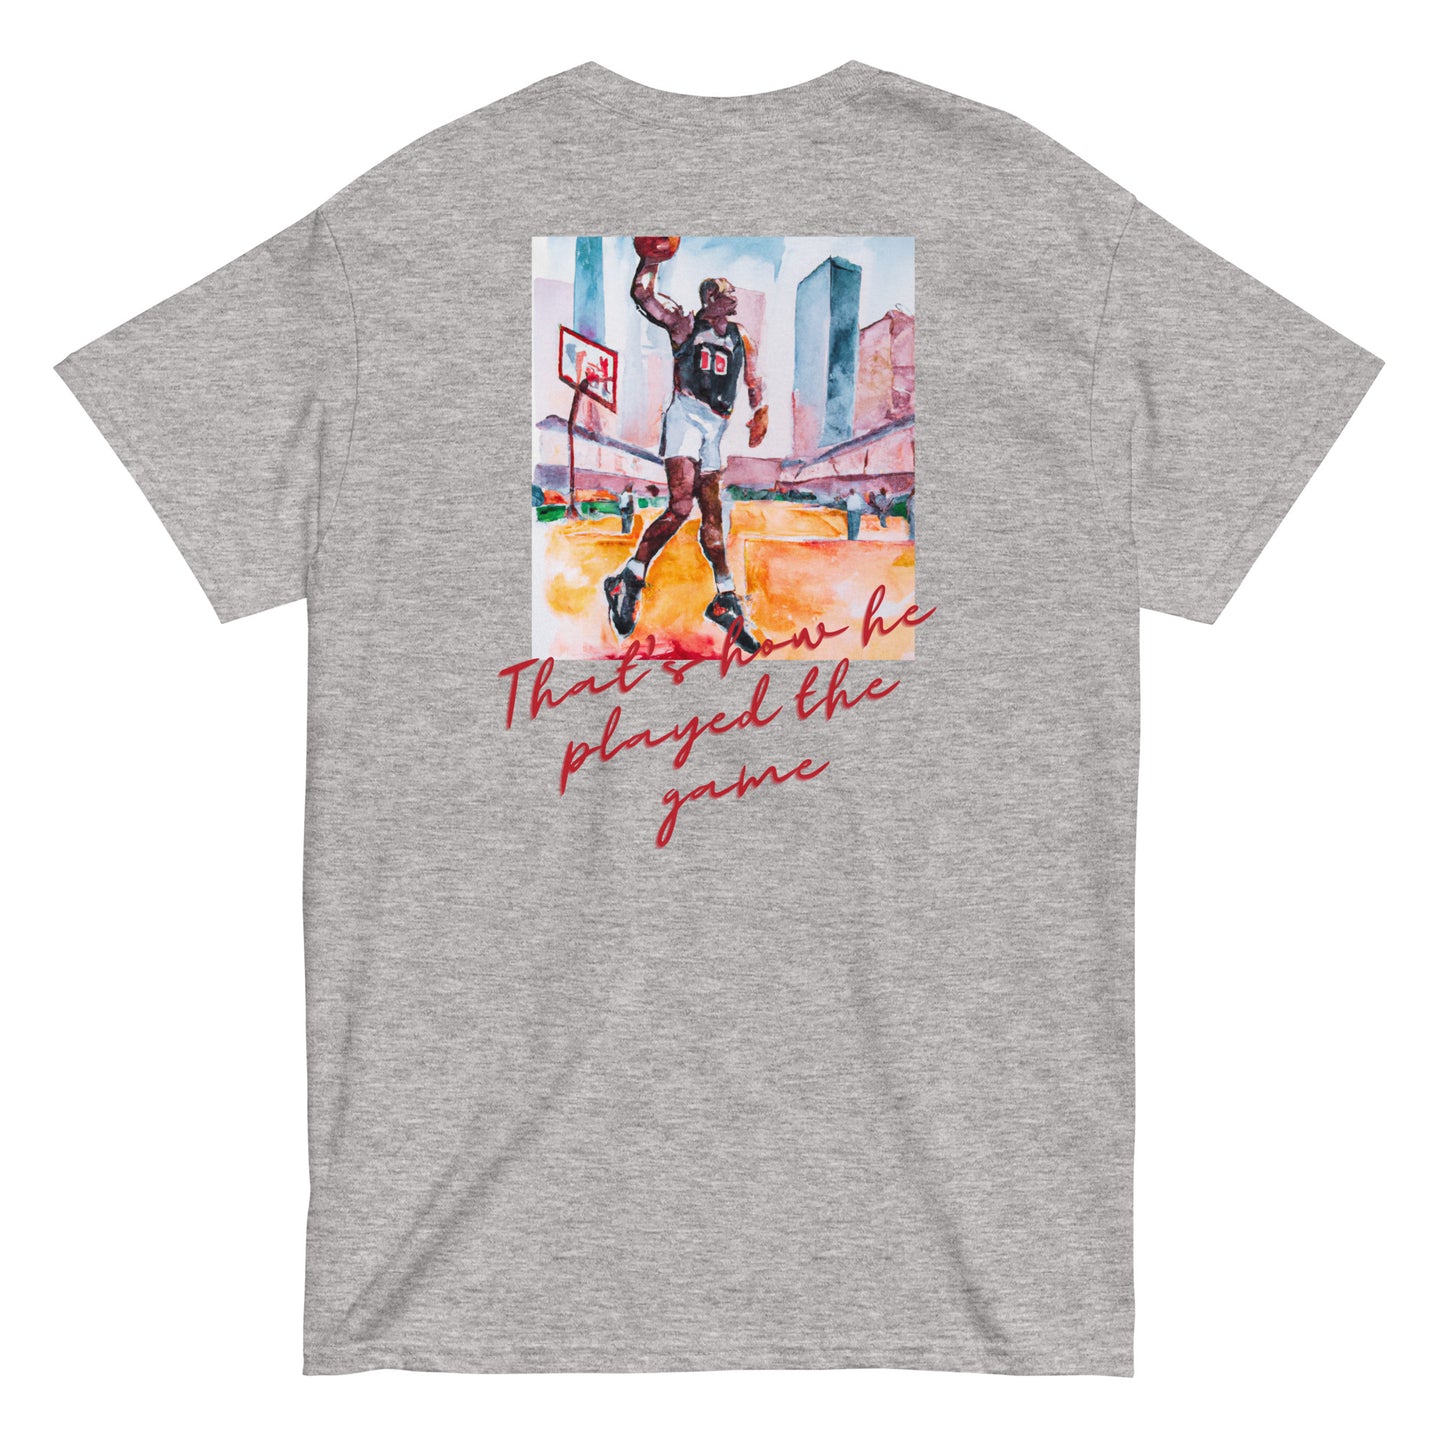 T-shirt “That’s How He Played The Game” Brodé - Gris